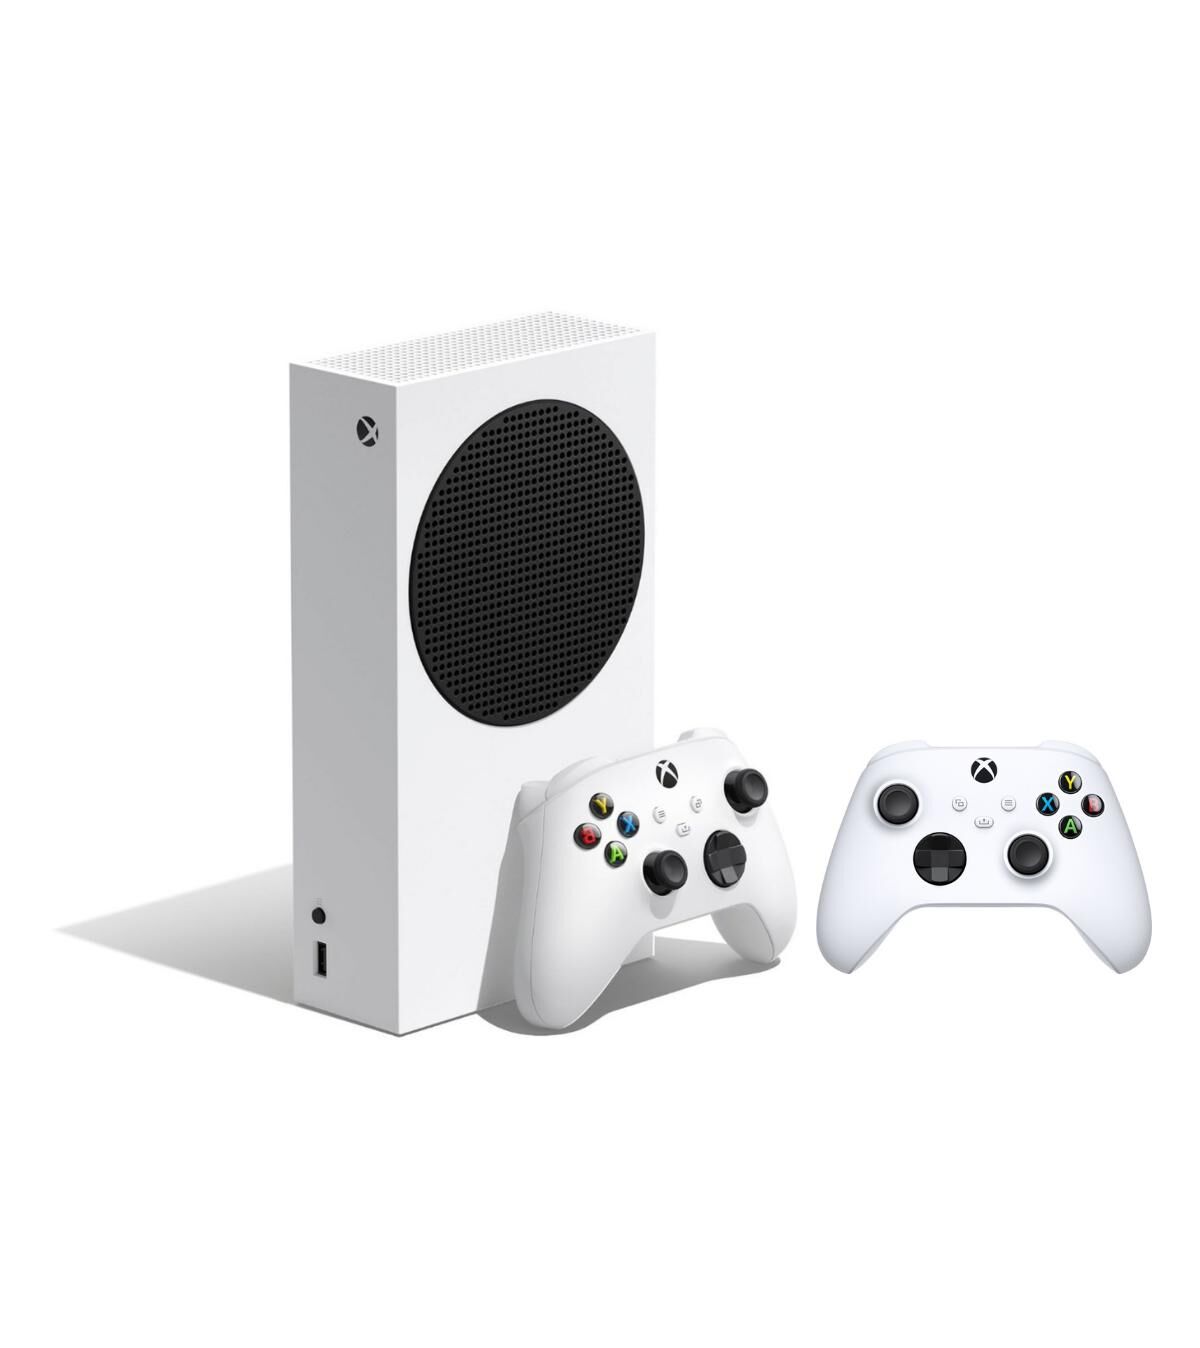 Microsoft Xbox Series S 512 Gb All-Digital Gaming Console & White Controller (Total of 2 Controllers Included) - White